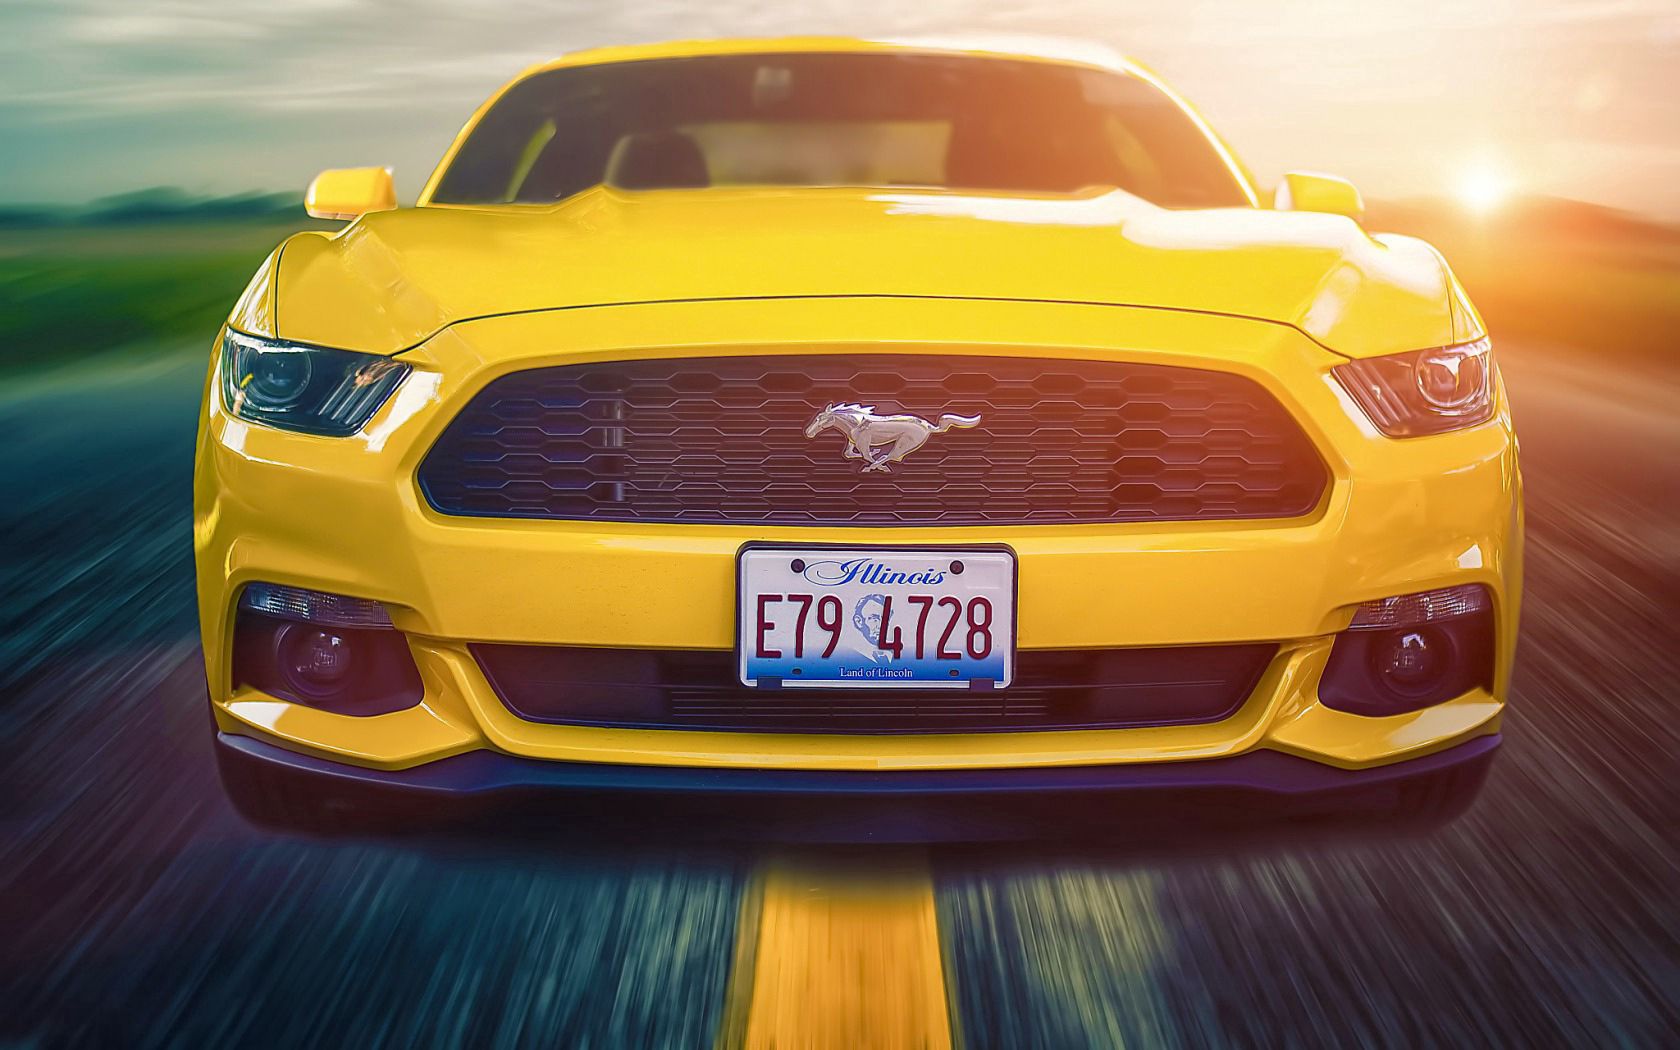 ford mustang, cars, yellow, front view, muscle car, 2015